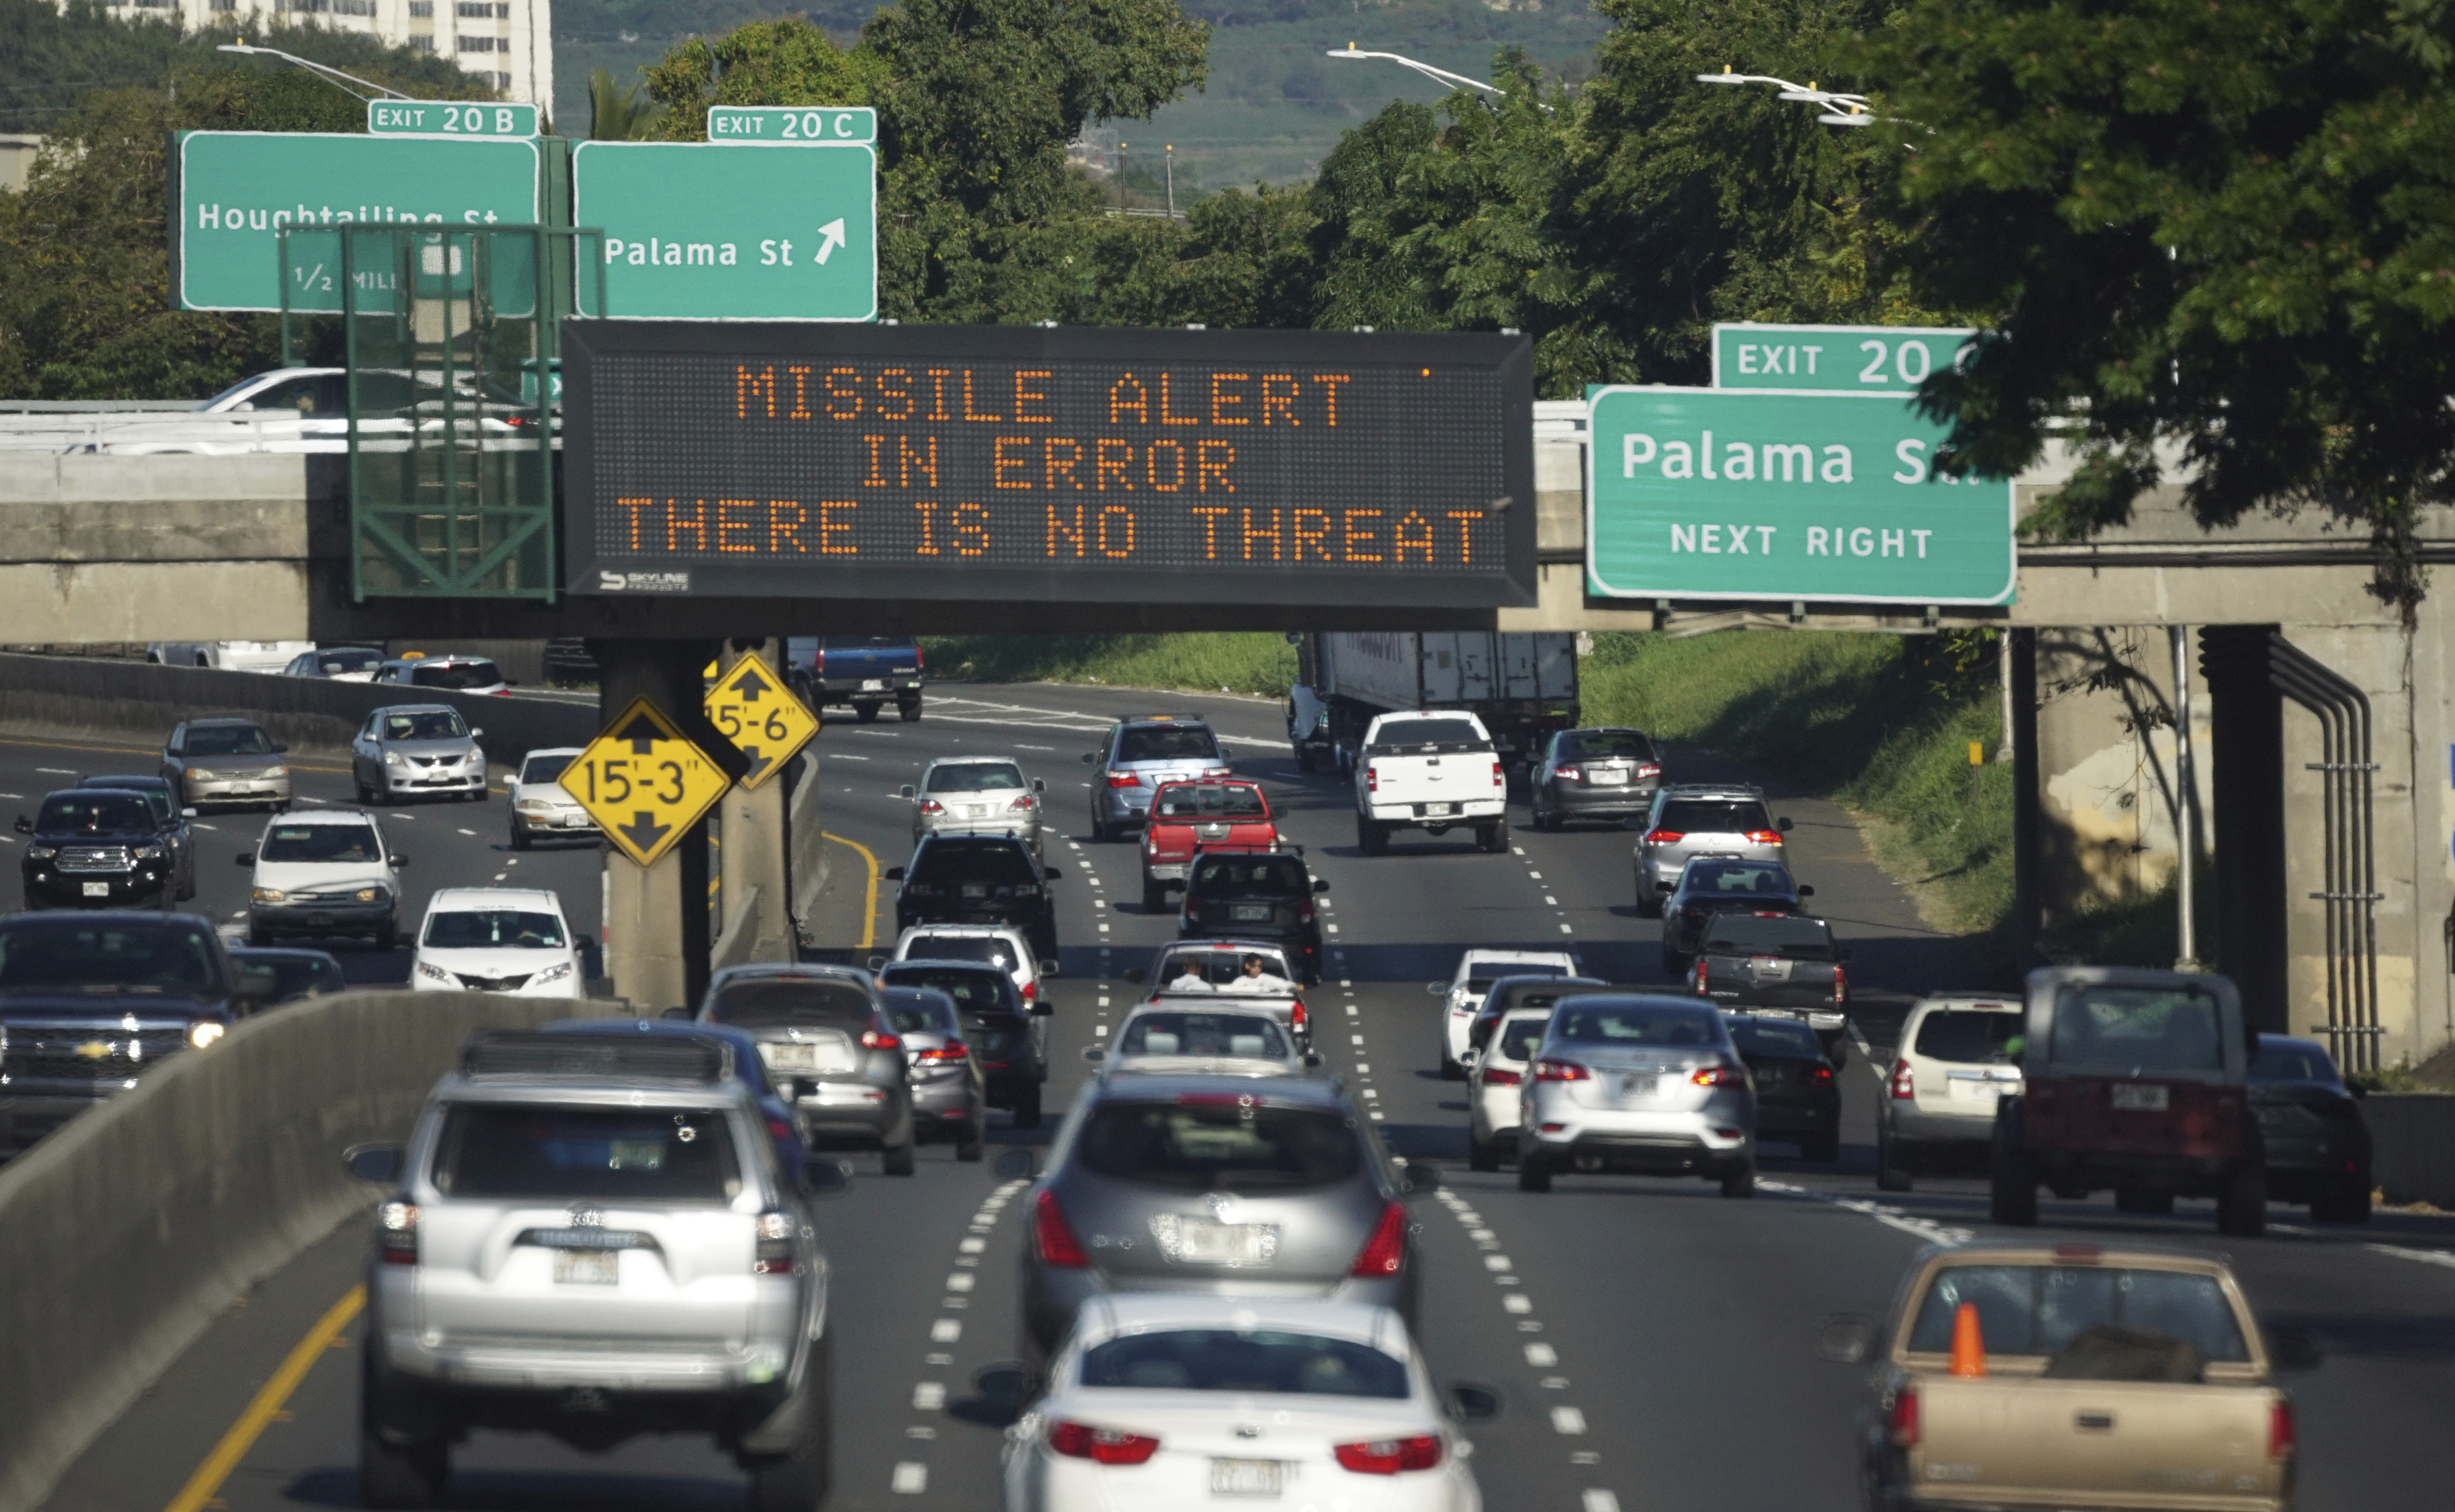 A sign in Hawaii about a false alarm